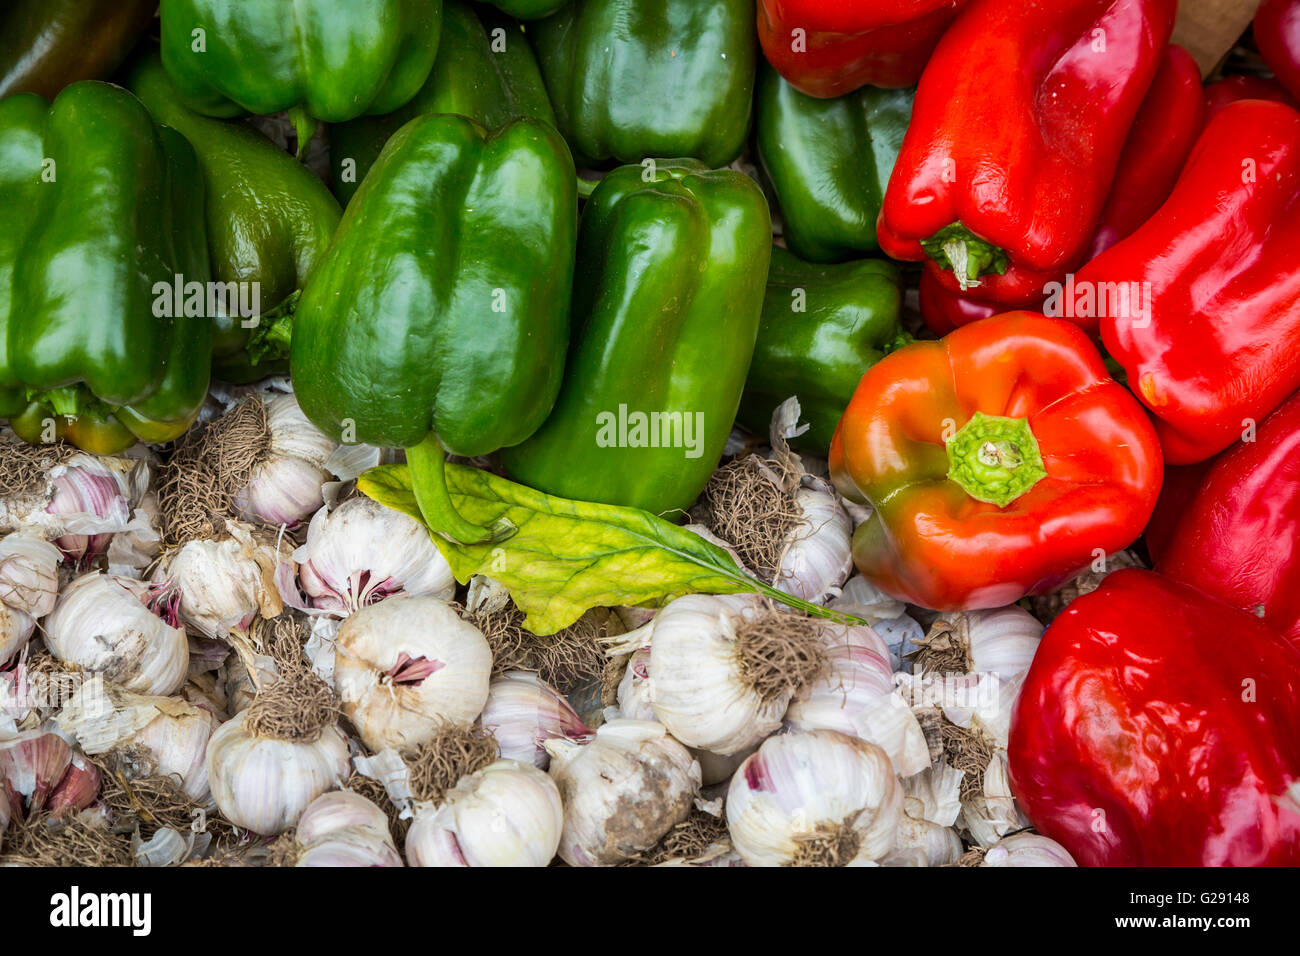 Fresh produce for sale at the colorful city market in Valparaiso, Chile, South America. Stock Photo